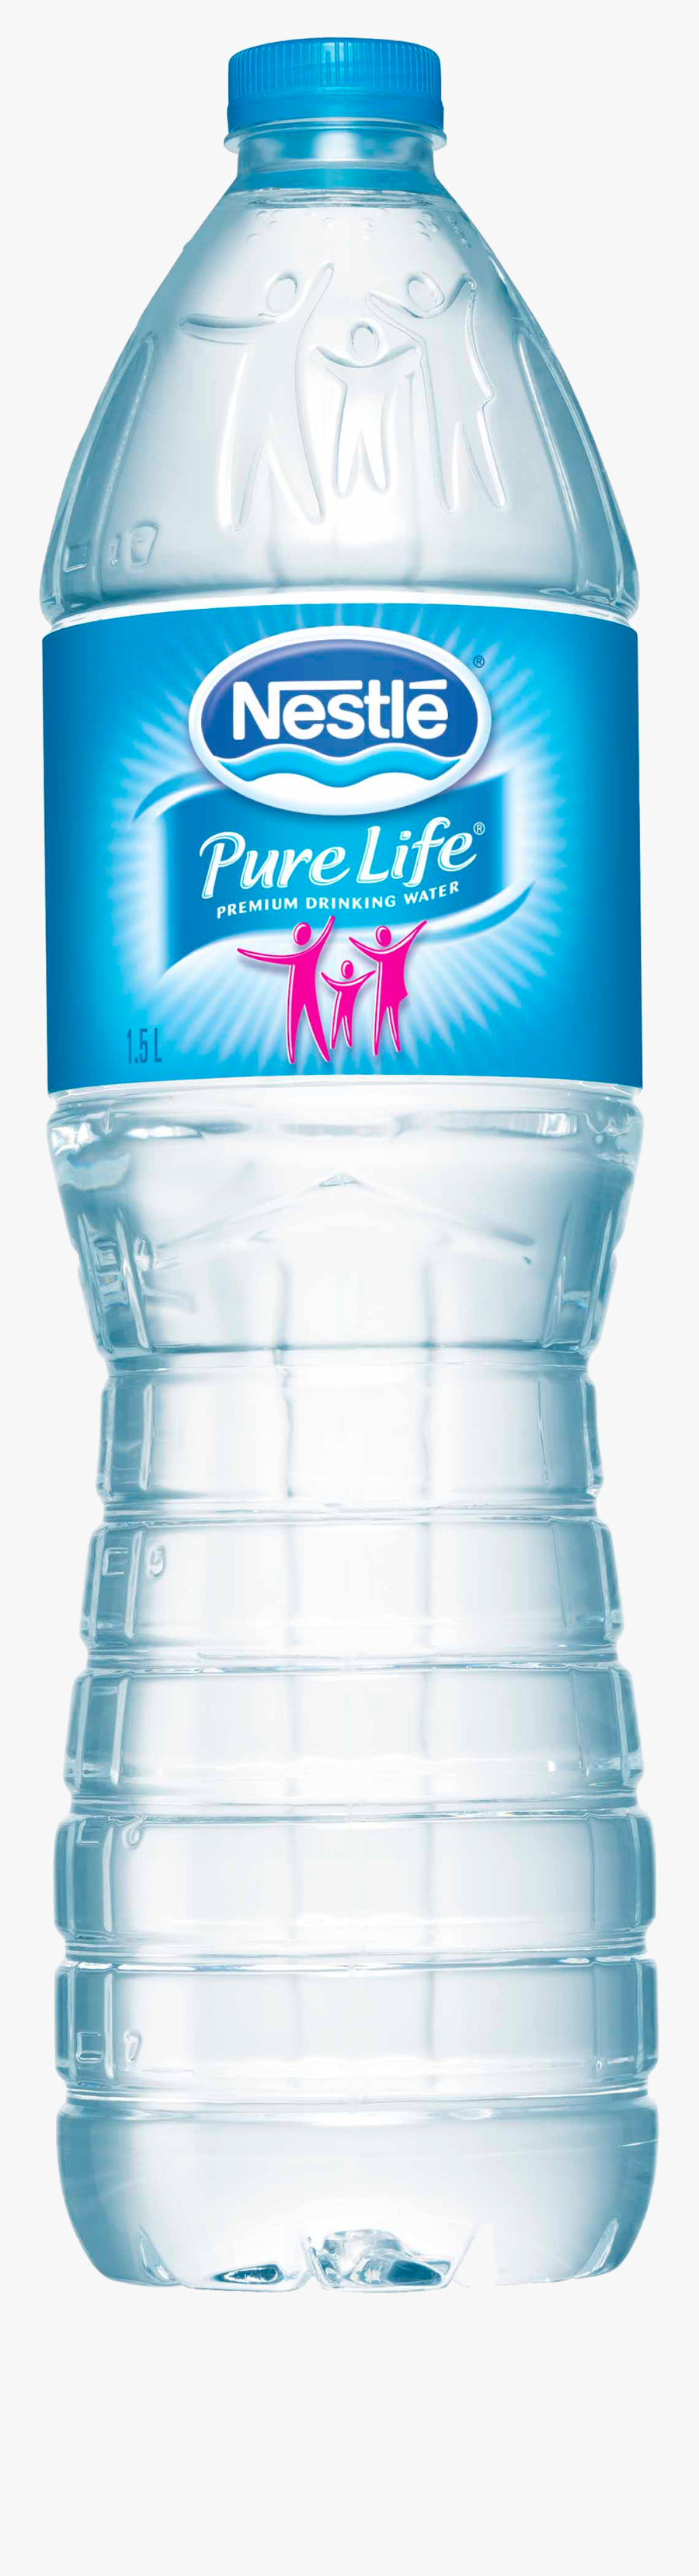 Water Bottle Png Images Free Download, Transparent Clipart